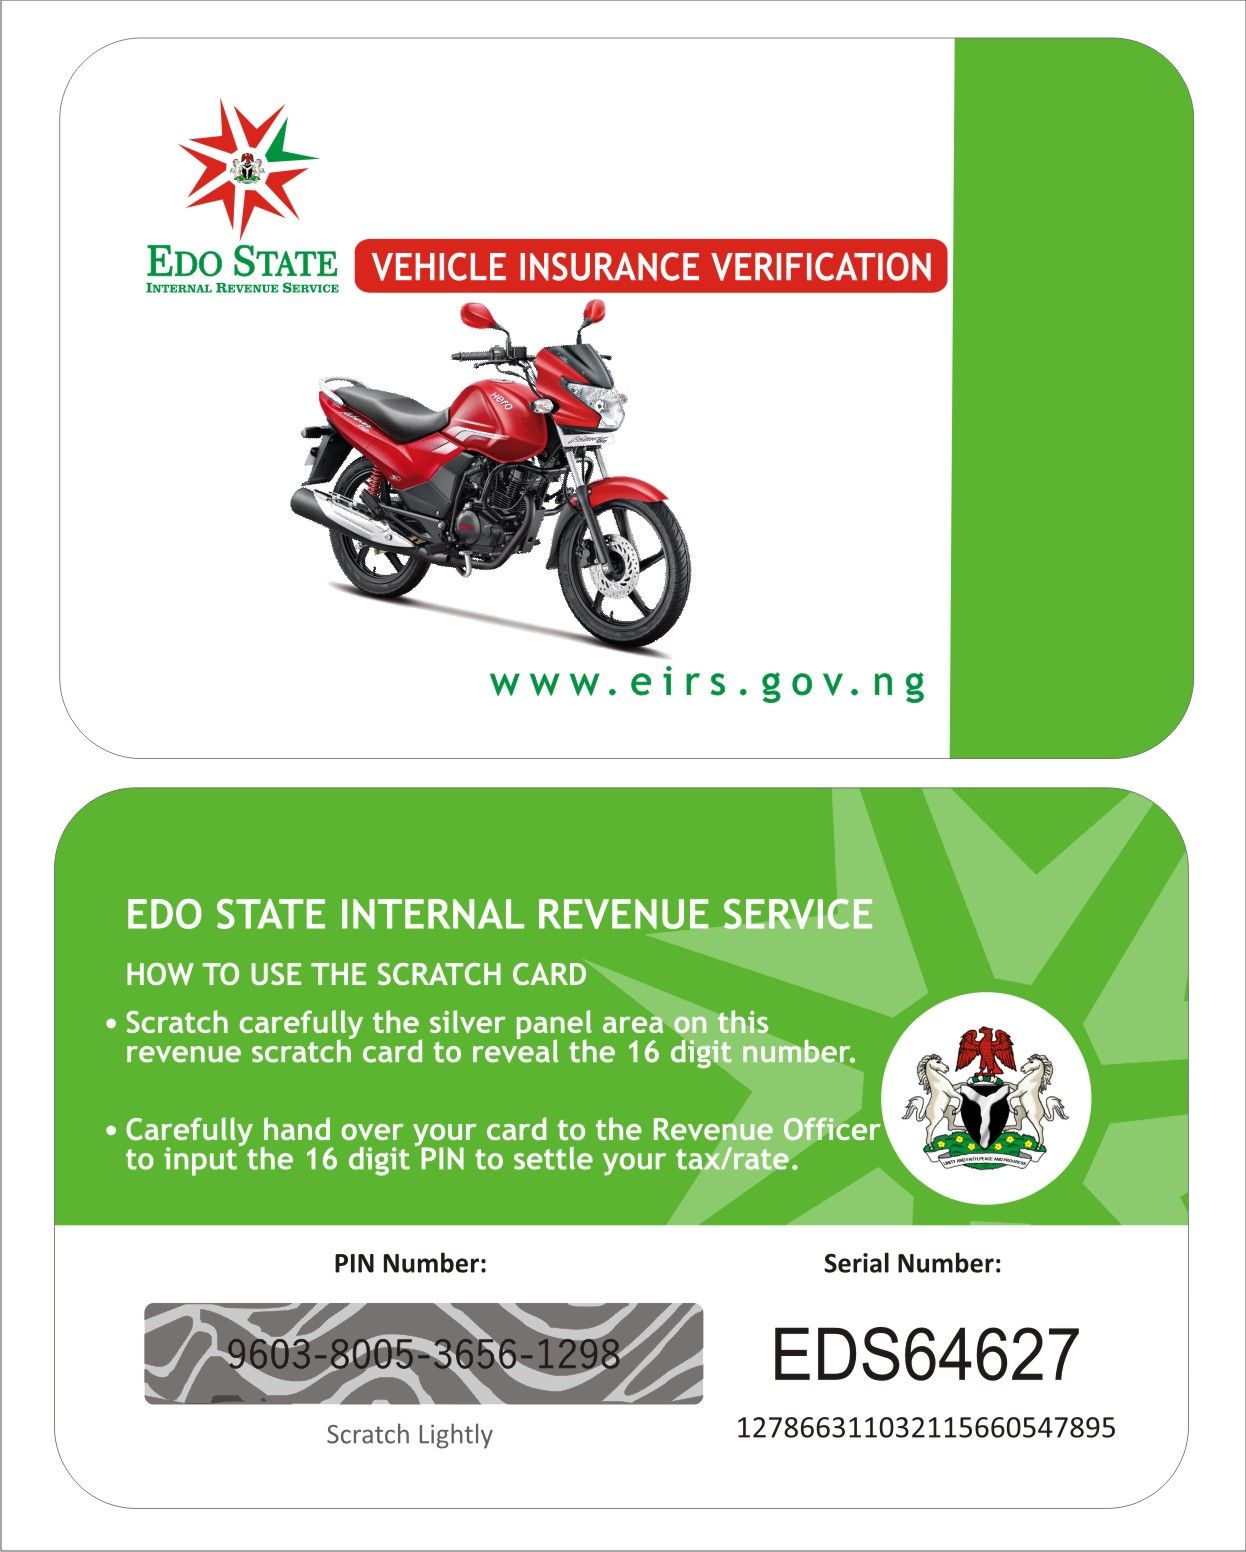 CALL CHINEDU ON 09022536974 TO PRINT E-PAYMENT SCRATCH CARDS